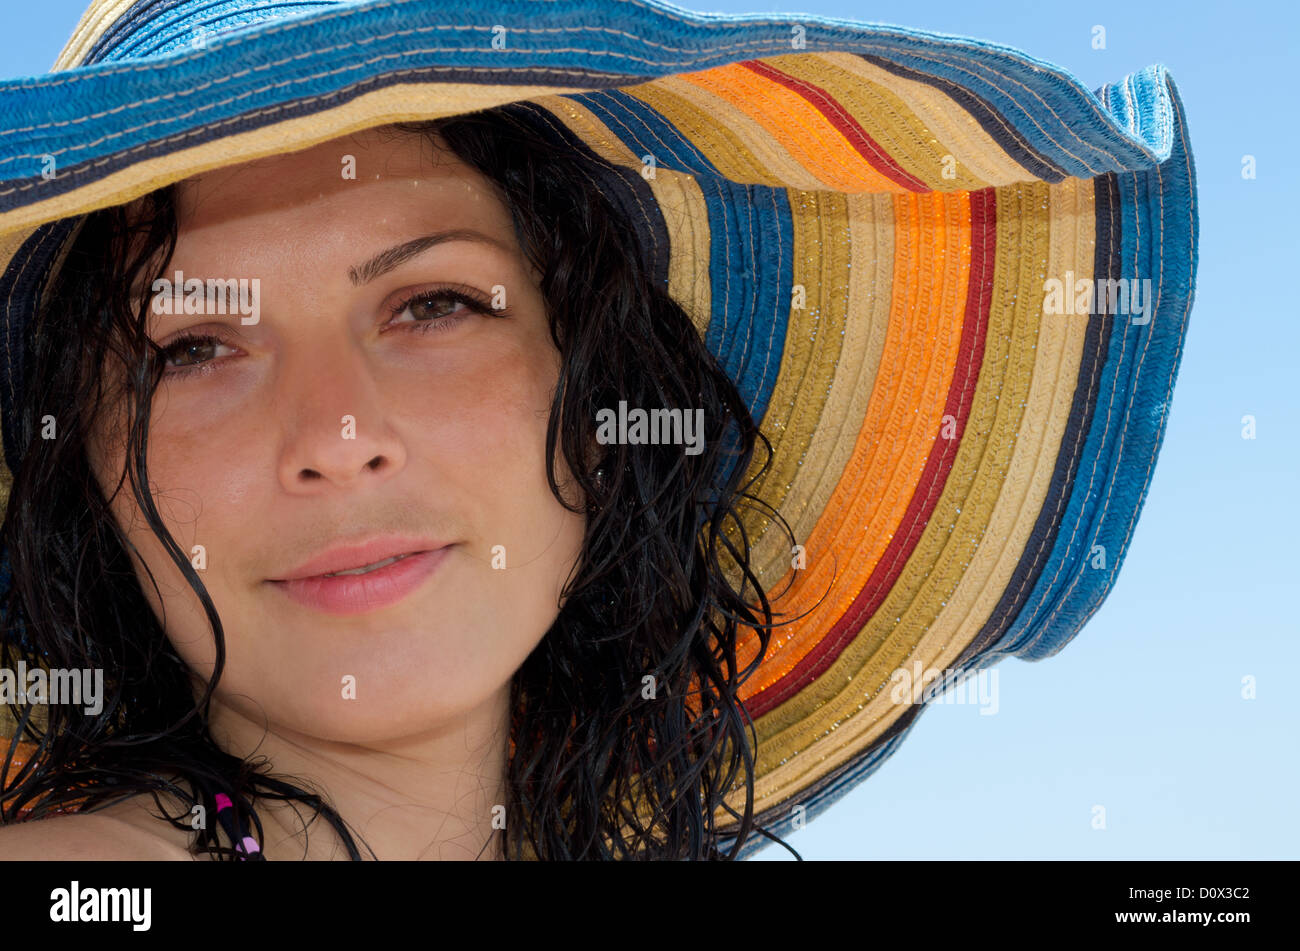 Close up portrait of attractive woman with colorful hat Stock Photo